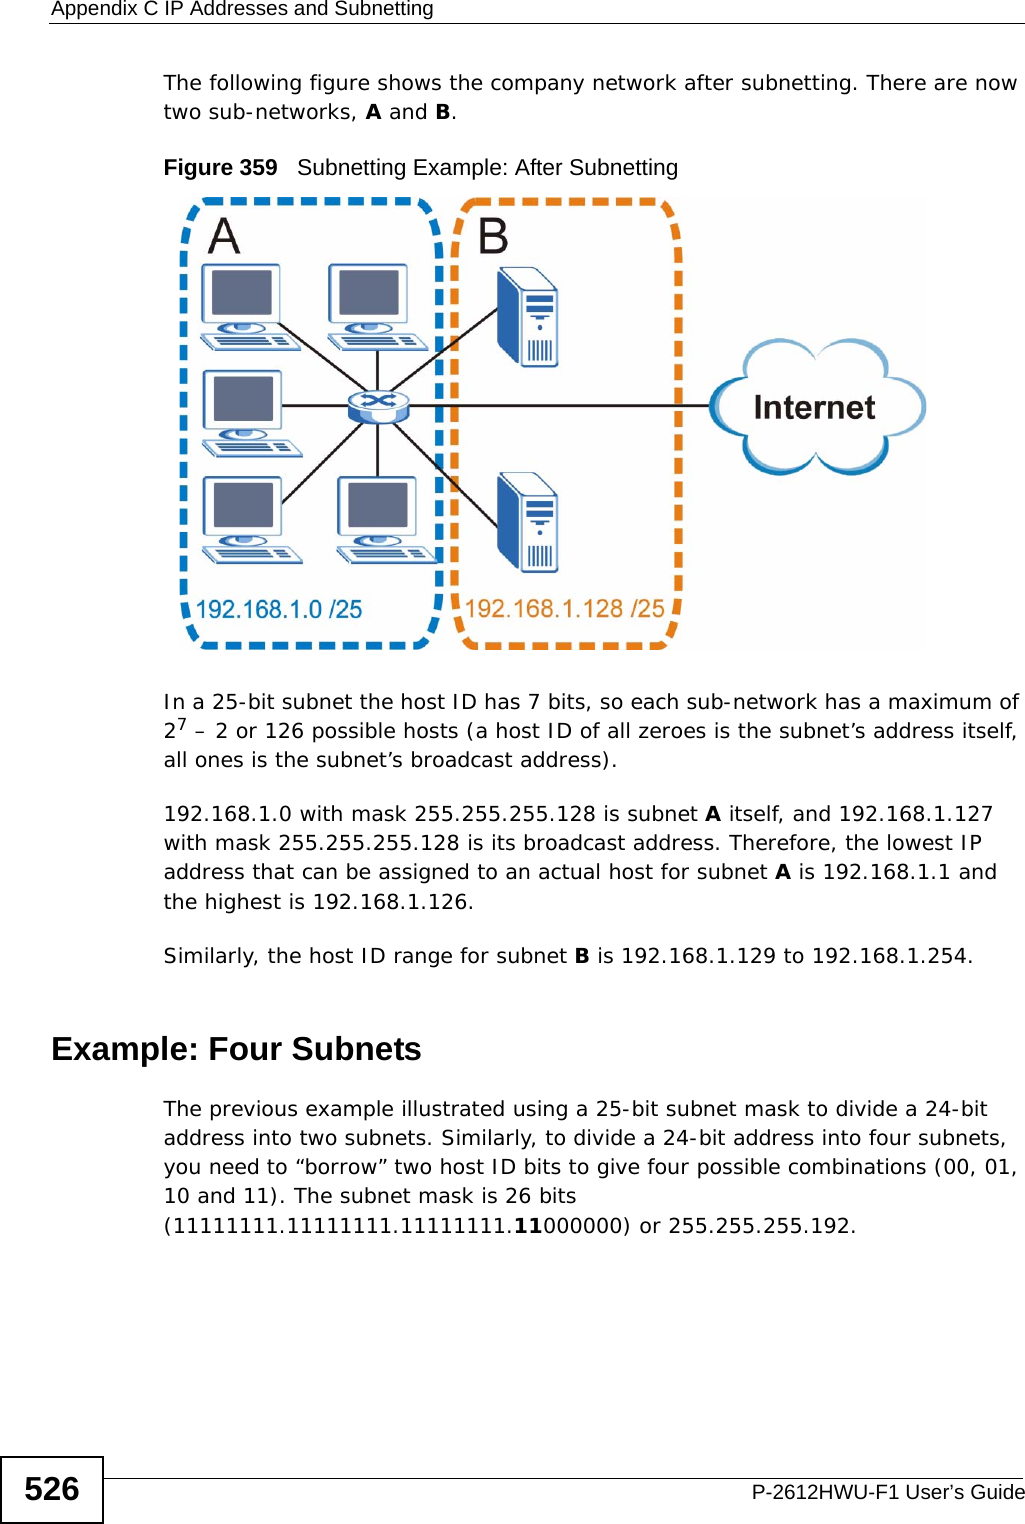 Appendix C IP Addresses and SubnettingP-2612HWU-F1 User’s Guide526The following figure shows the company network after subnetting. There are now two sub-networks, A and B. Figure 359   Subnetting Example: After SubnettingIn a 25-bit subnet the host ID has 7 bits, so each sub-network has a maximum of 27 – 2 or 126 possible hosts (a host ID of all zeroes is the subnet’s address itself, all ones is the subnet’s broadcast address).192.168.1.0 with mask 255.255.255.128 is subnet A itself, and 192.168.1.127 with mask 255.255.255.128 is its broadcast address. Therefore, the lowest IP address that can be assigned to an actual host for subnet A is 192.168.1.1 and the highest is 192.168.1.126. Similarly, the host ID range for subnet B is 192.168.1.129 to 192.168.1.254.Example: Four Subnets The previous example illustrated using a 25-bit subnet mask to divide a 24-bit address into two subnets. Similarly, to divide a 24-bit address into four subnets, you need to “borrow” two host ID bits to give four possible combinations (00, 01, 10 and 11). The subnet mask is 26 bits (11111111.11111111.11111111.11000000) or 255.255.255.192. 